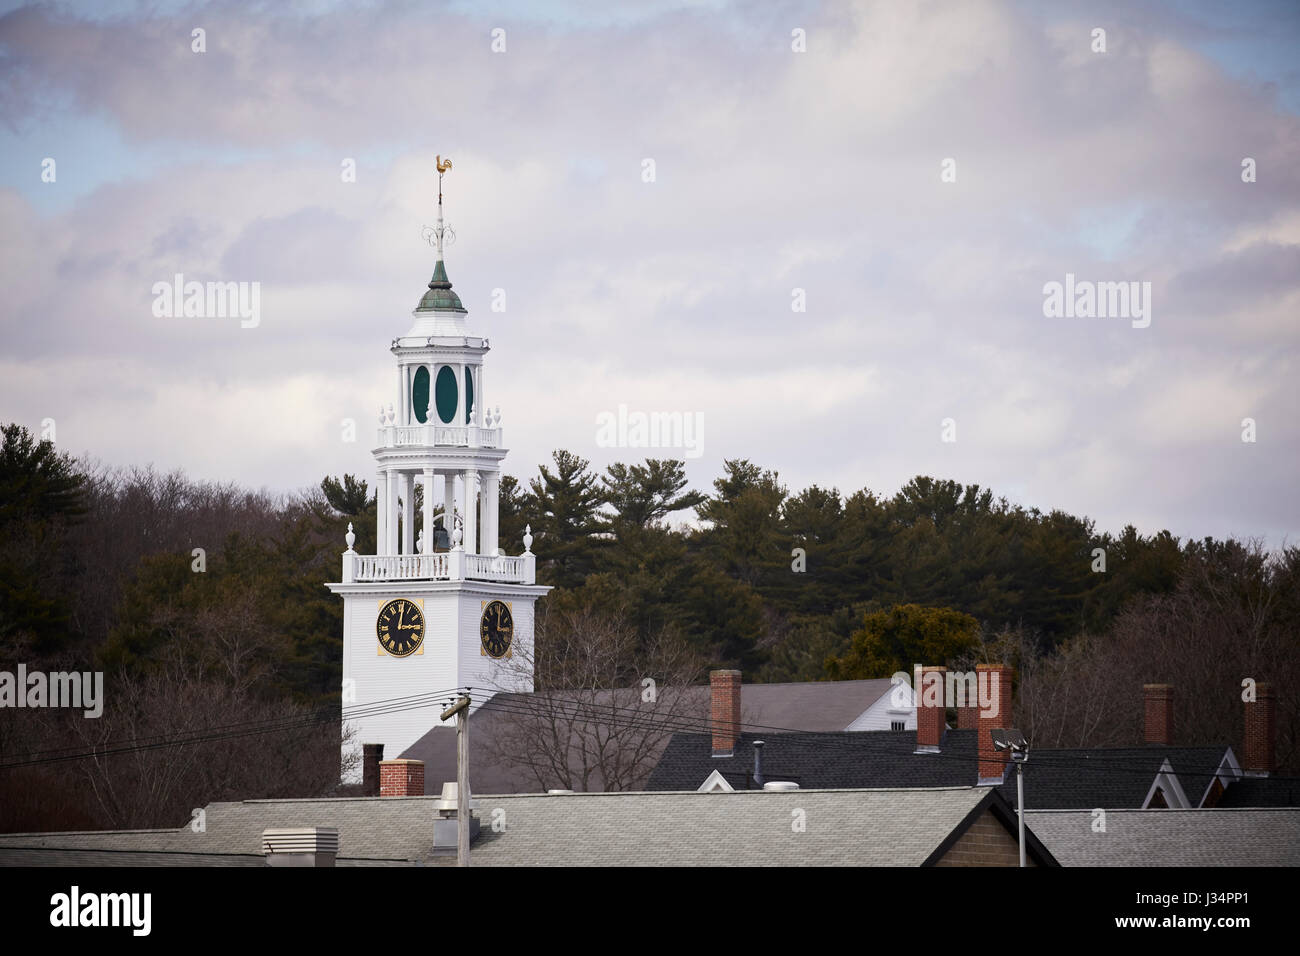 The First Parish Church, clock tower  Manchester by the Sea, Boston, Massachusetts, United States, USA, Stock Photo